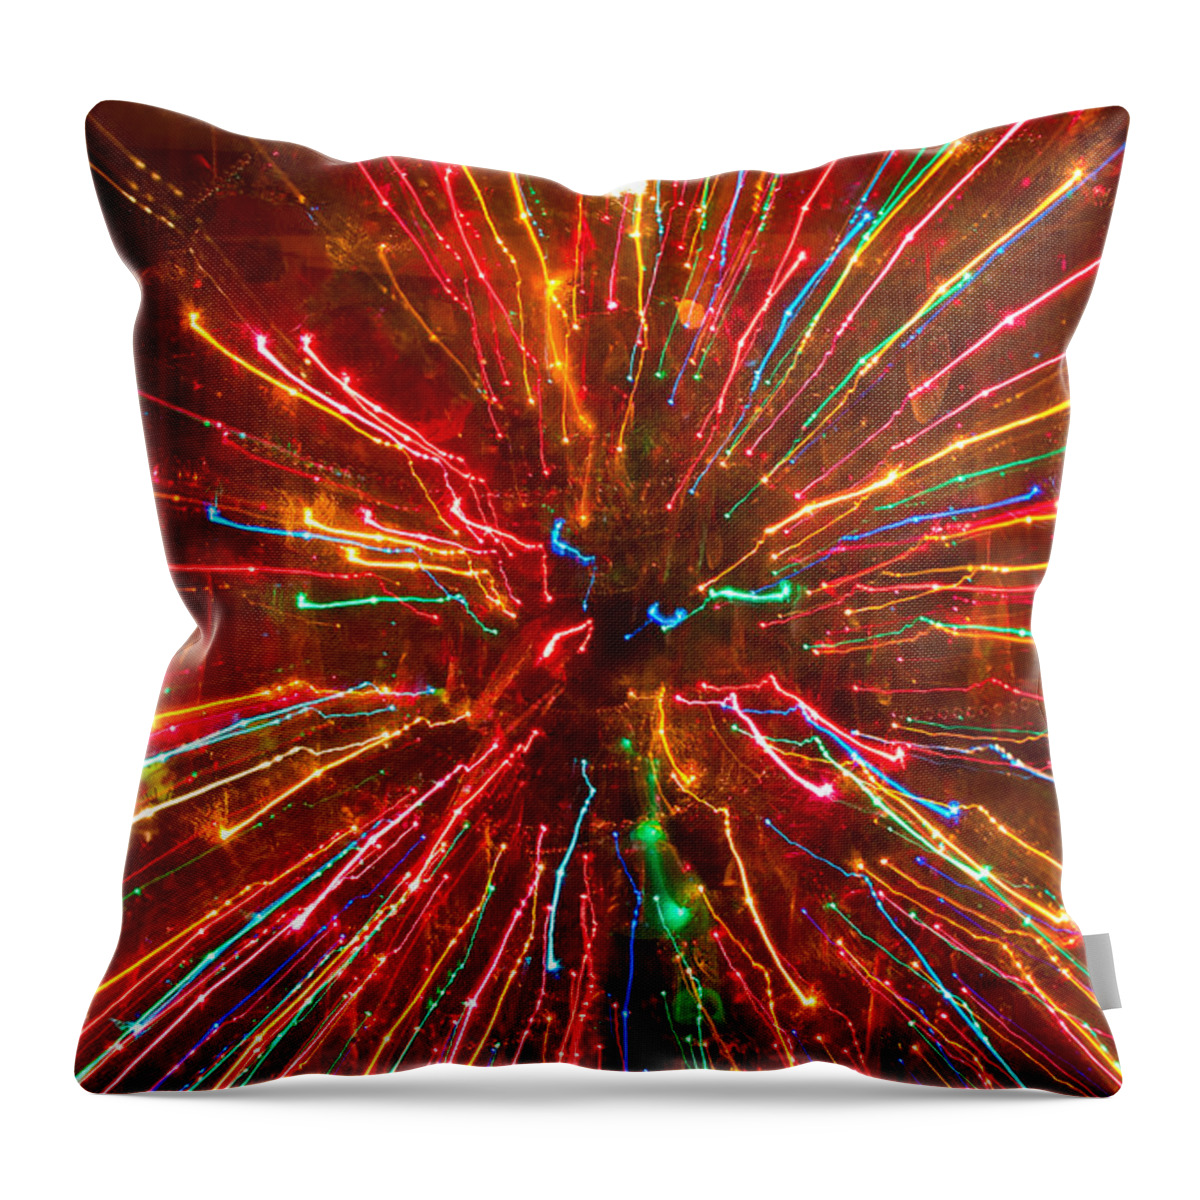 Abstract Throw Pillow featuring the photograph Crazy Fun Colorful Abstract by James BO Insogna